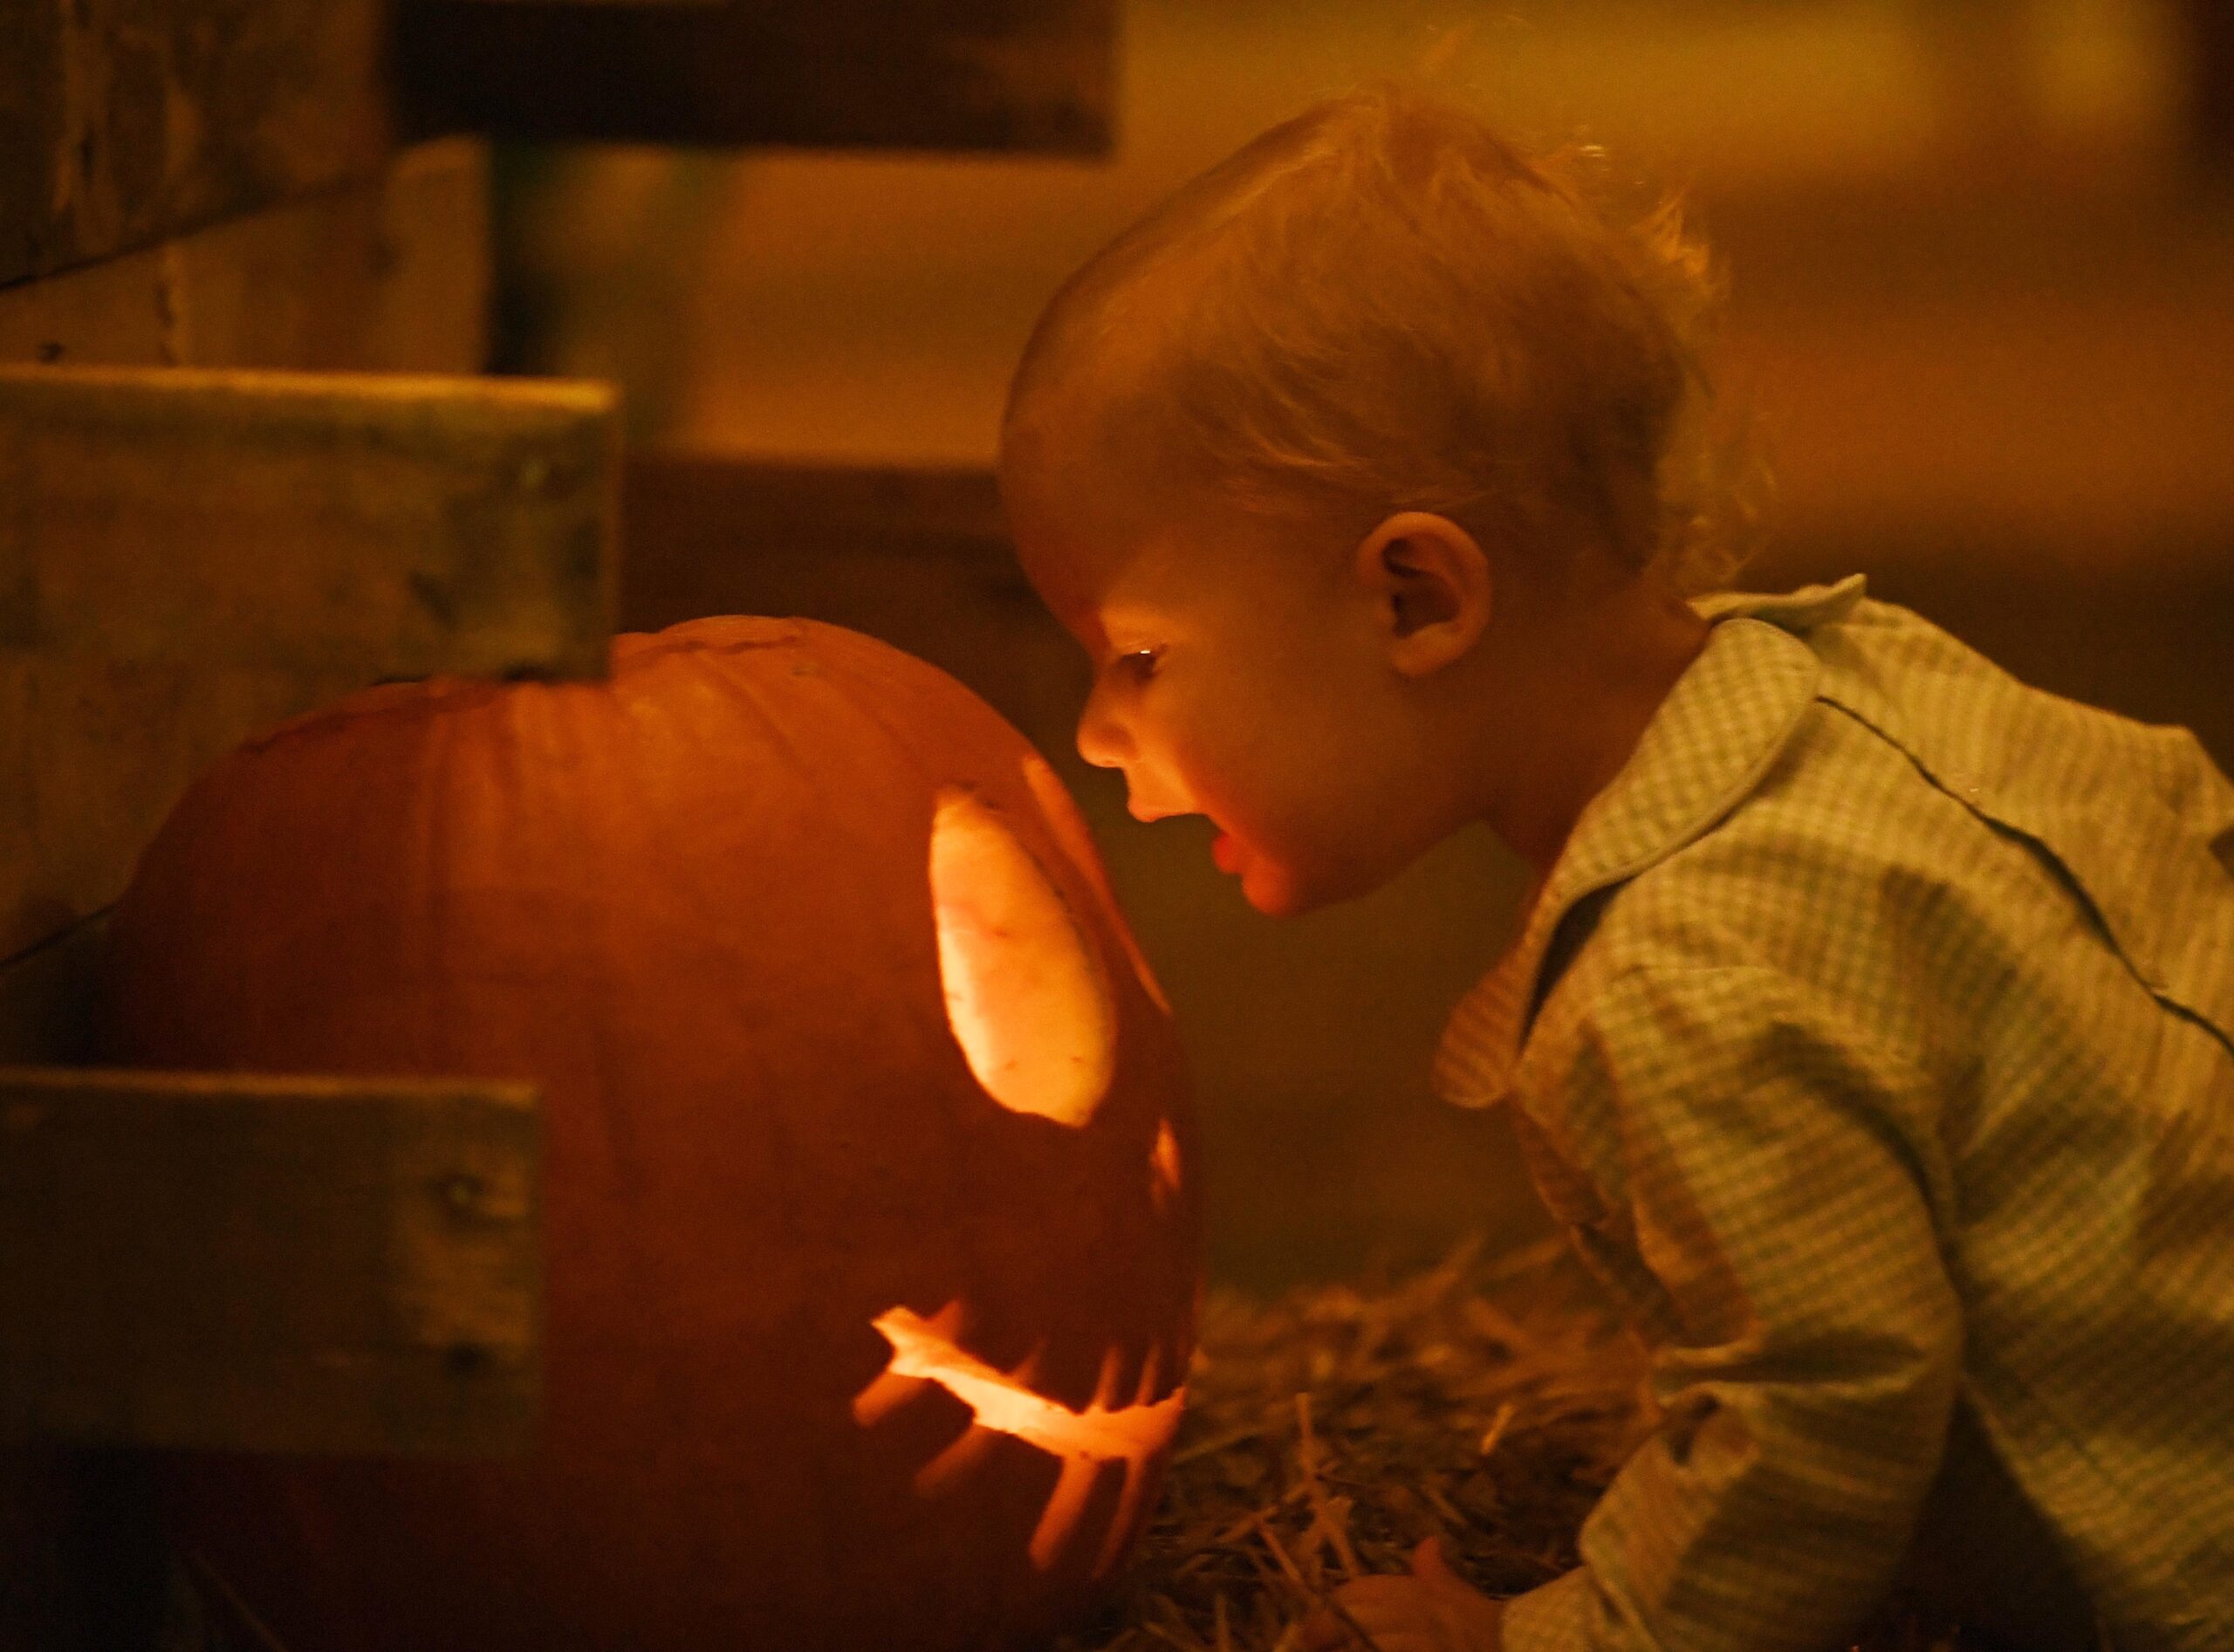 A child looks at what's lighting a pumpkin.